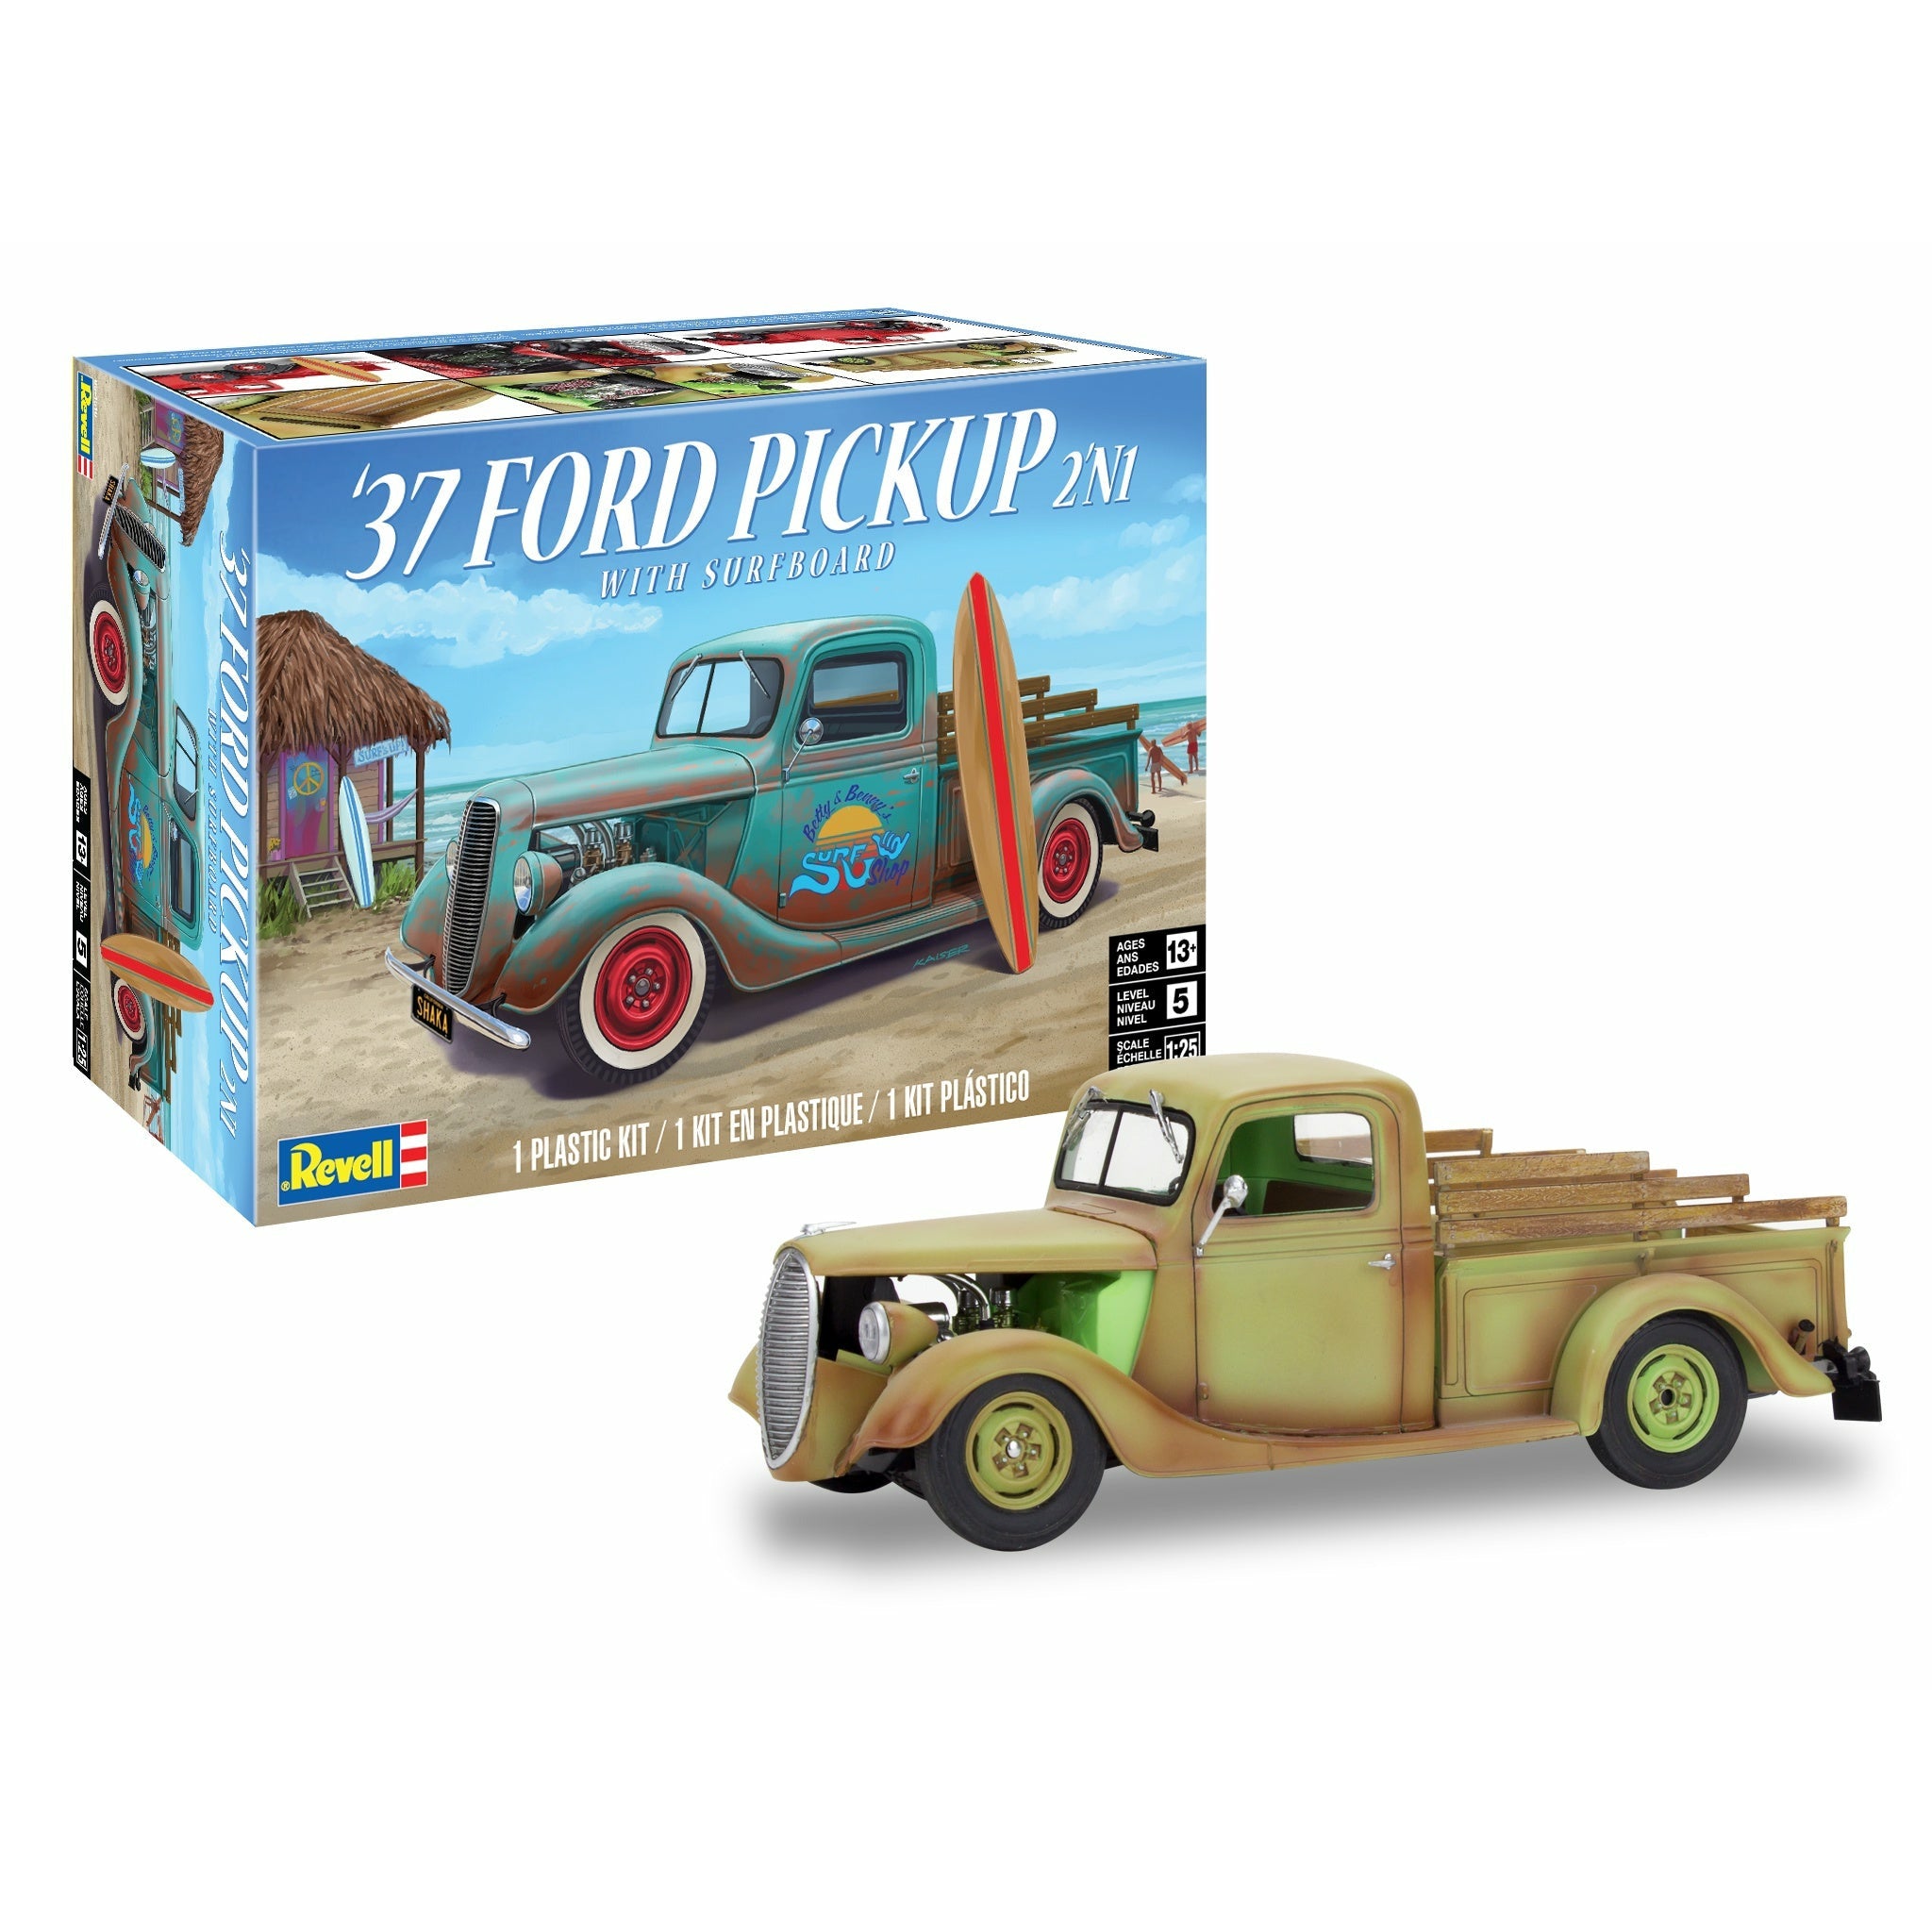 1937 Ford Pickup 2in1 w/Surfboard 1/25 #4516 by Revell